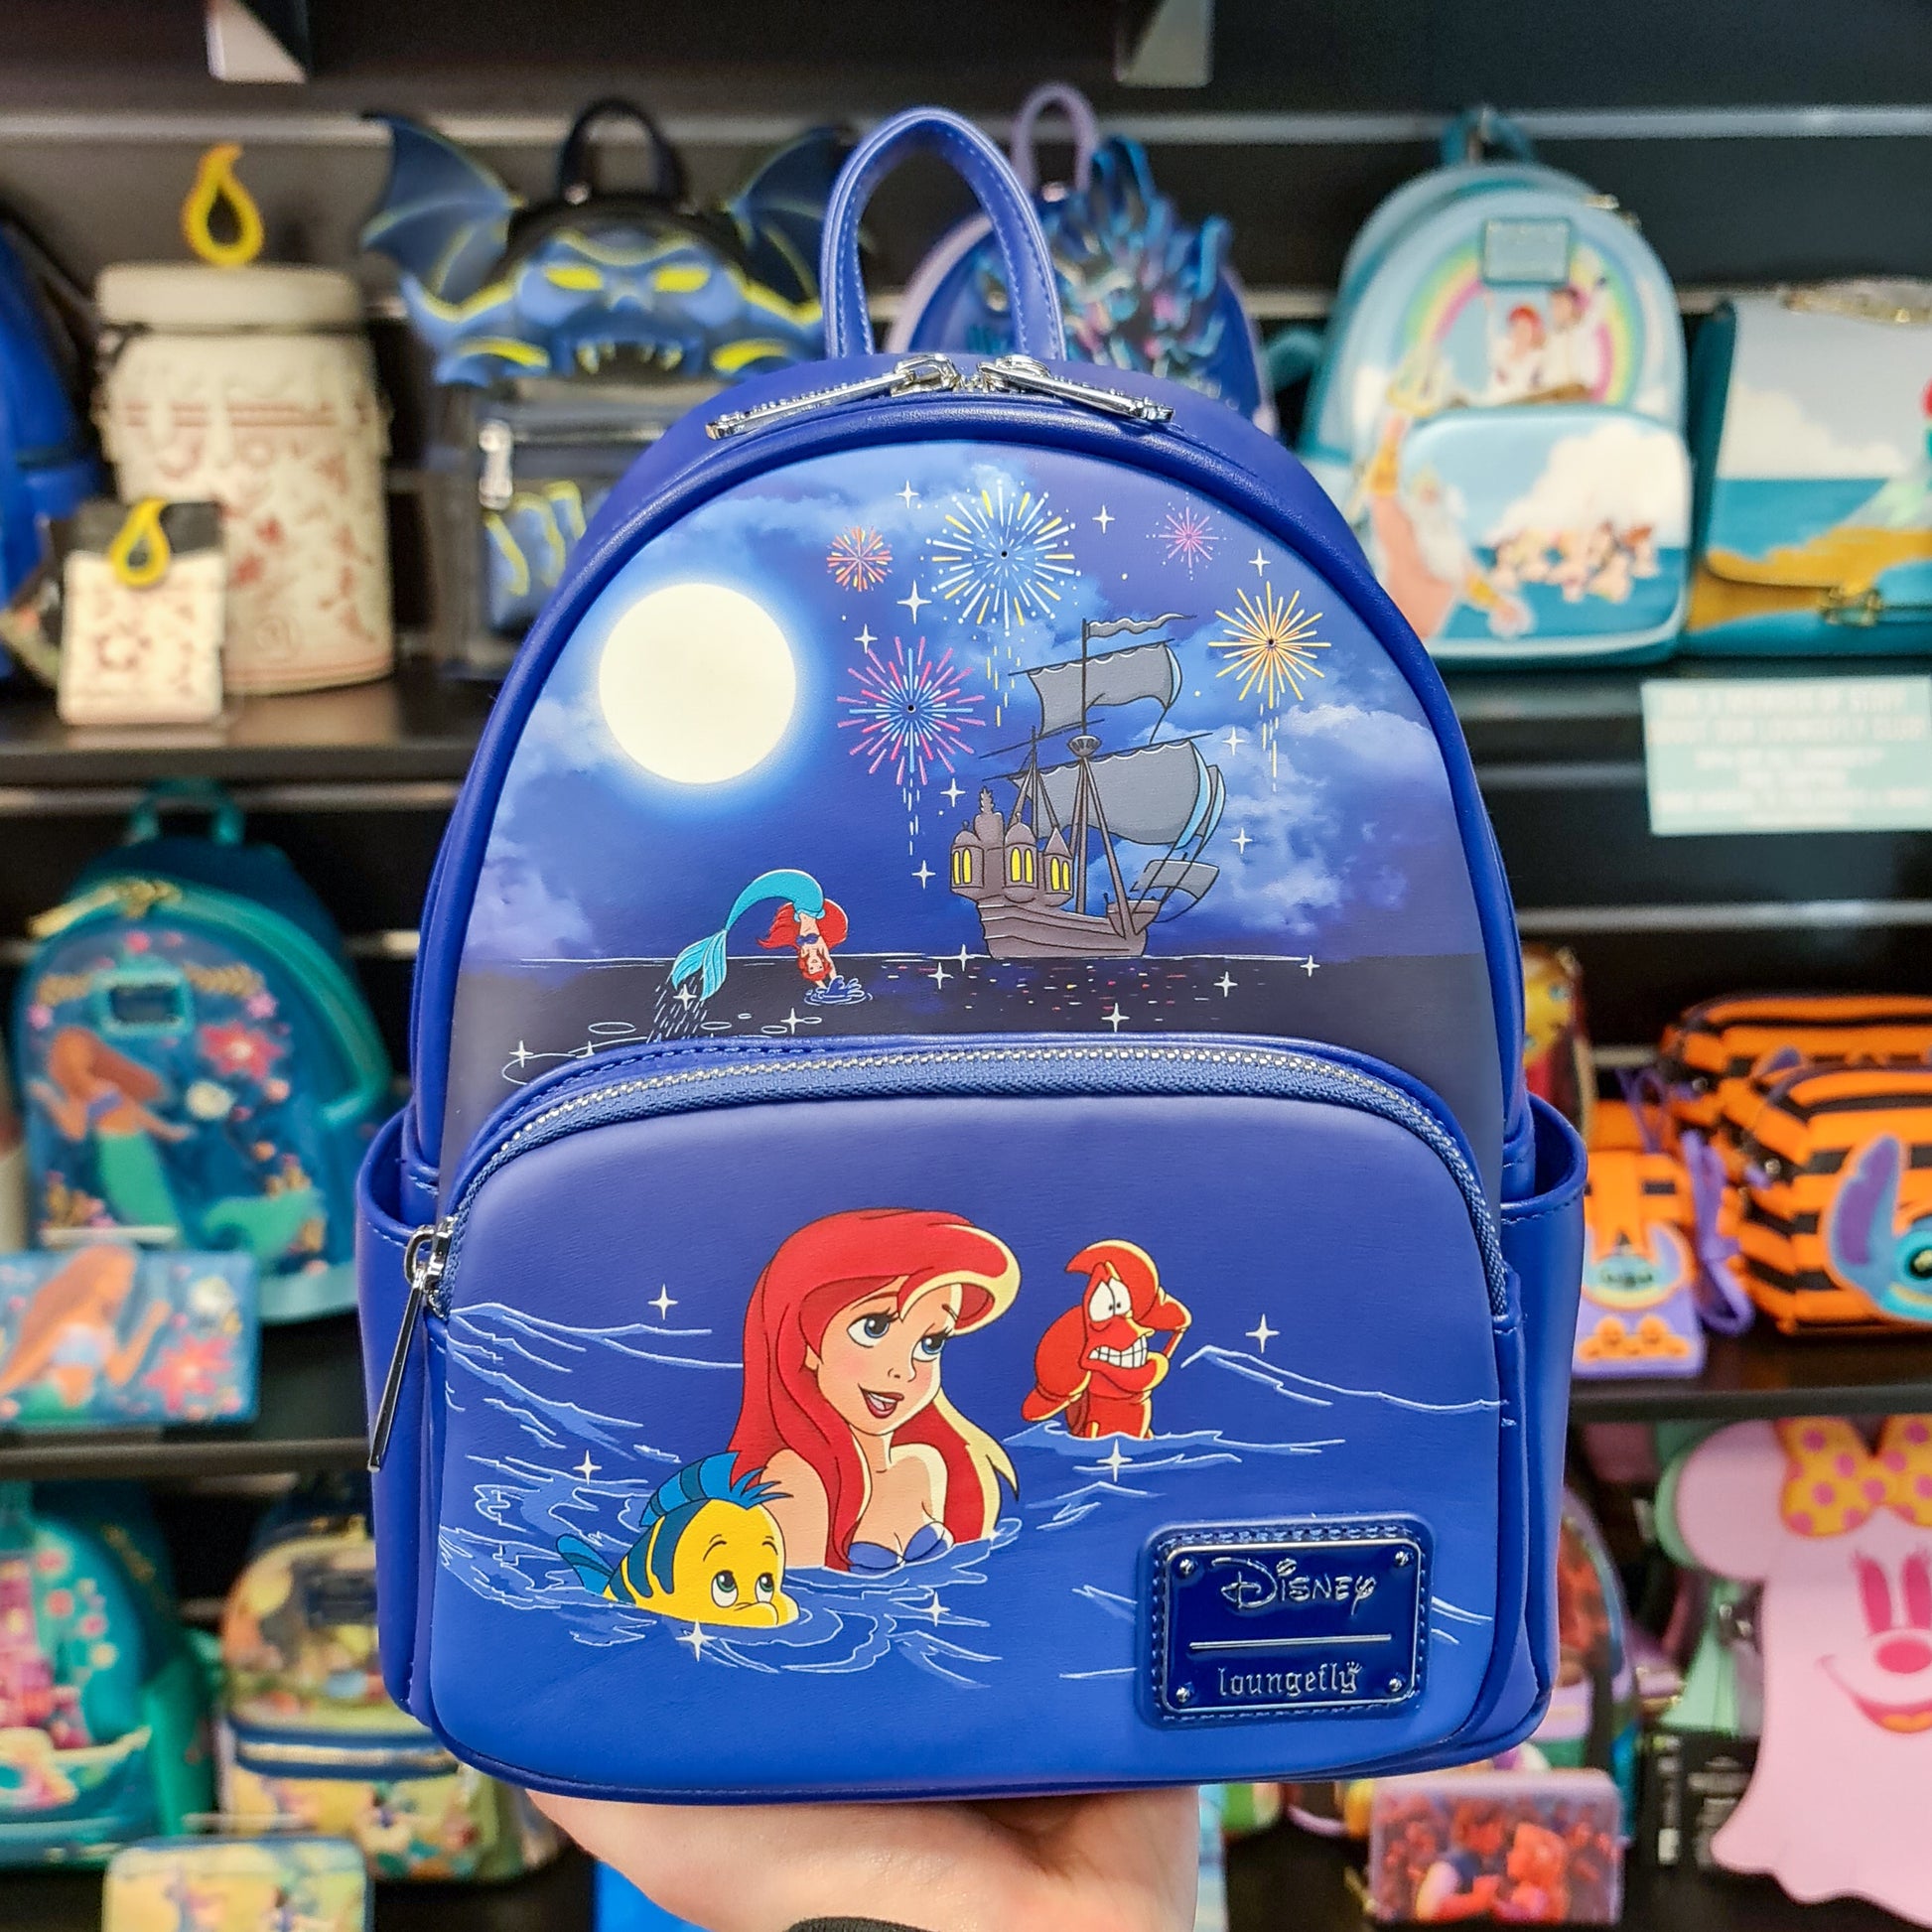 The Little Mermaid: Triton's Gift Loungefly Mini Backpack